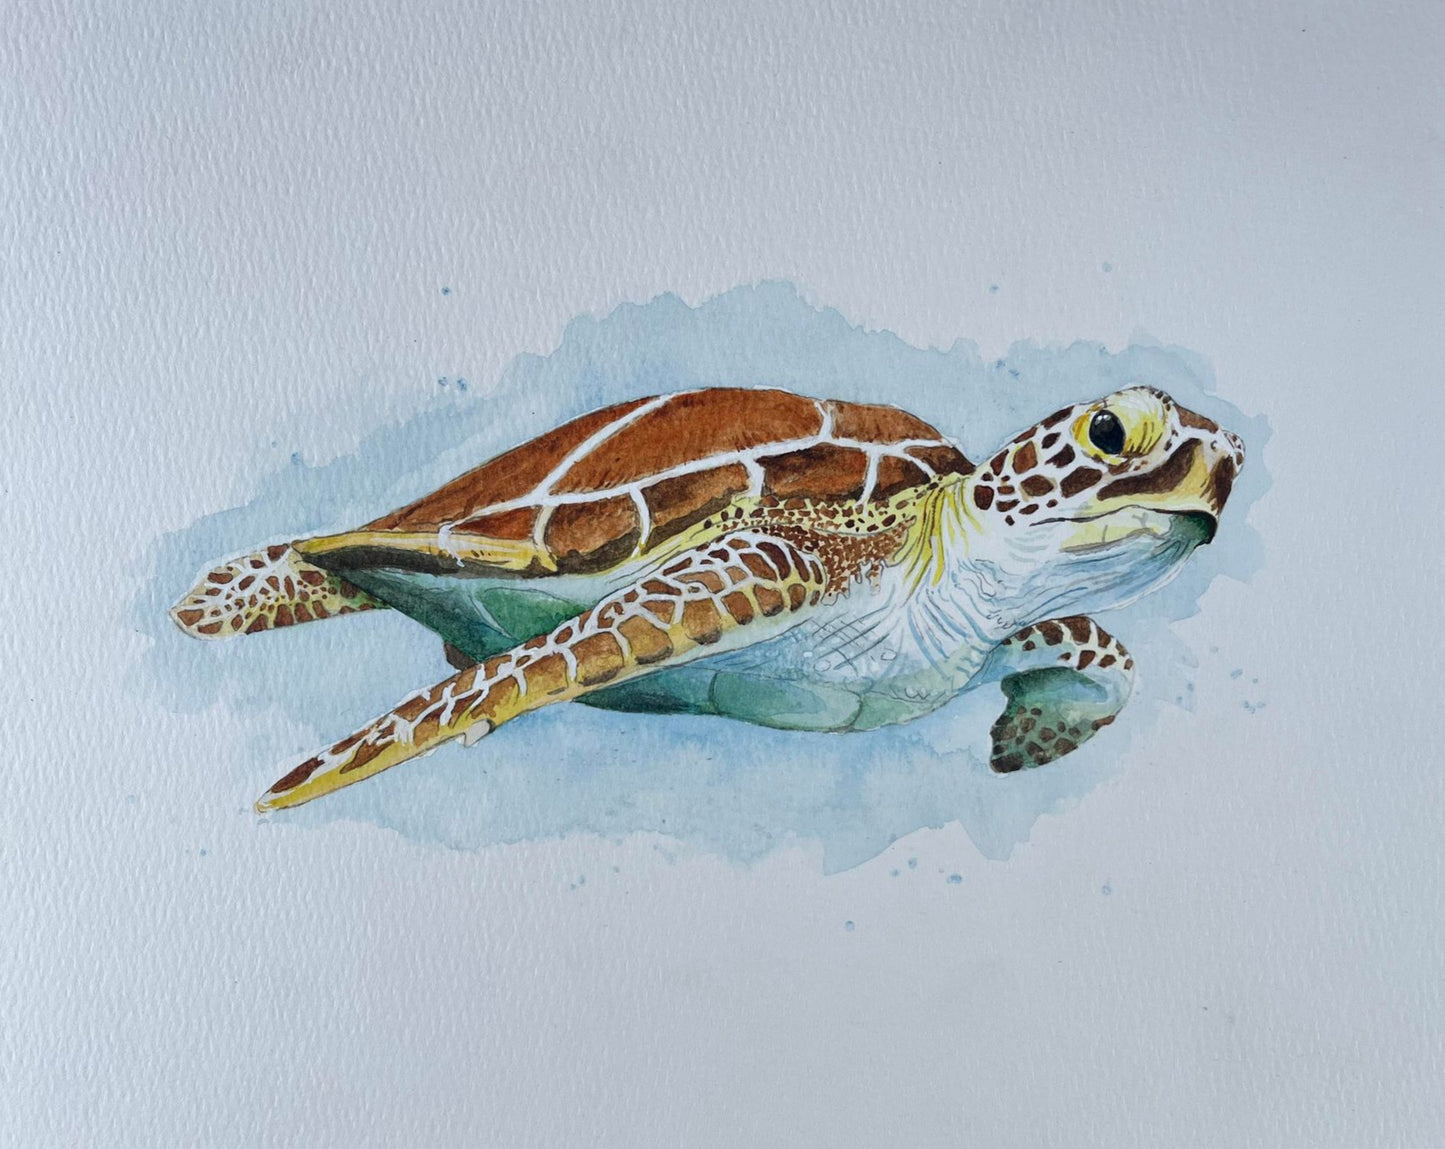 Watercolor Class - Step by Step - Paint Your Own Loggerhead Sea Turtle - Saturday, June 8th, 3-6p